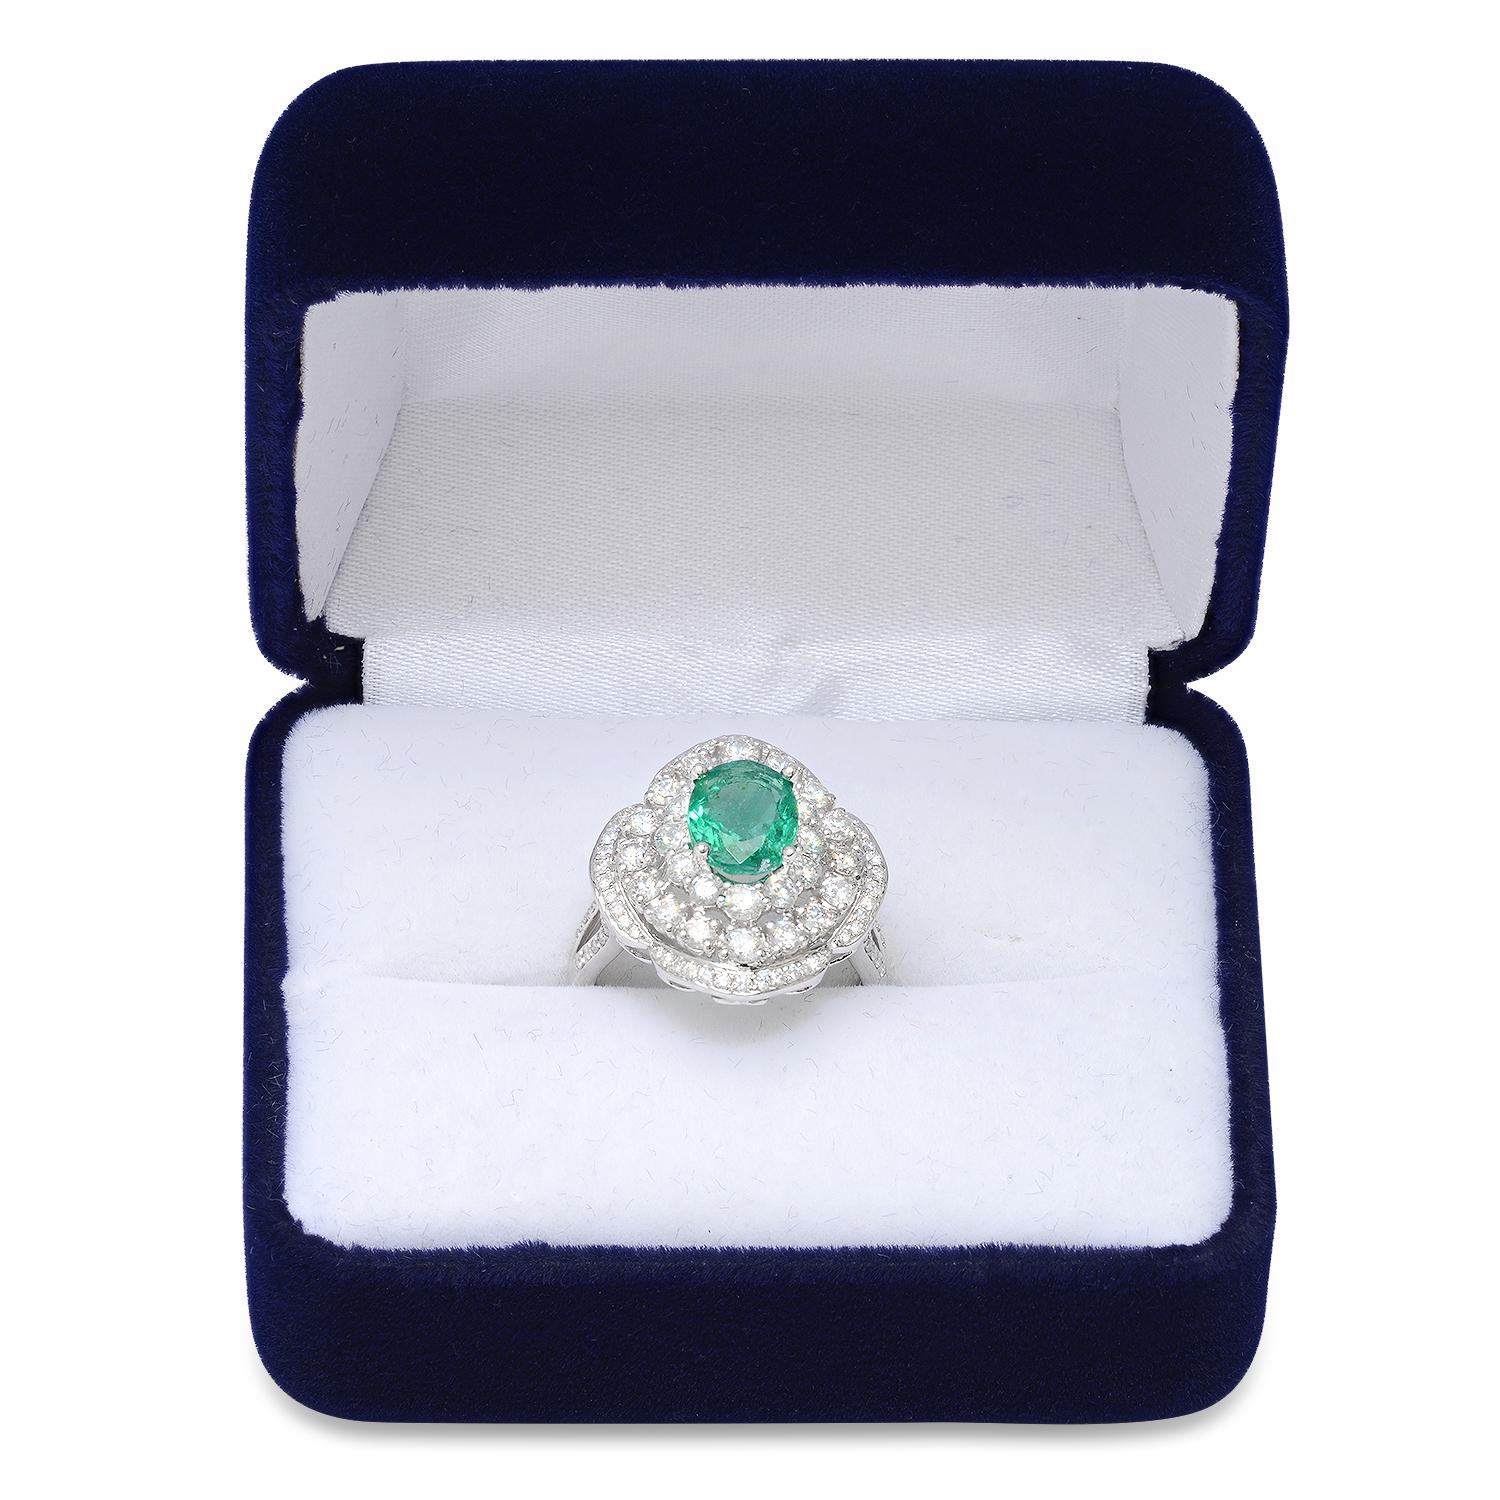 14K White Gold Setting with 1.31ct Emerald and 1.80ct Diamond Ladies Ring